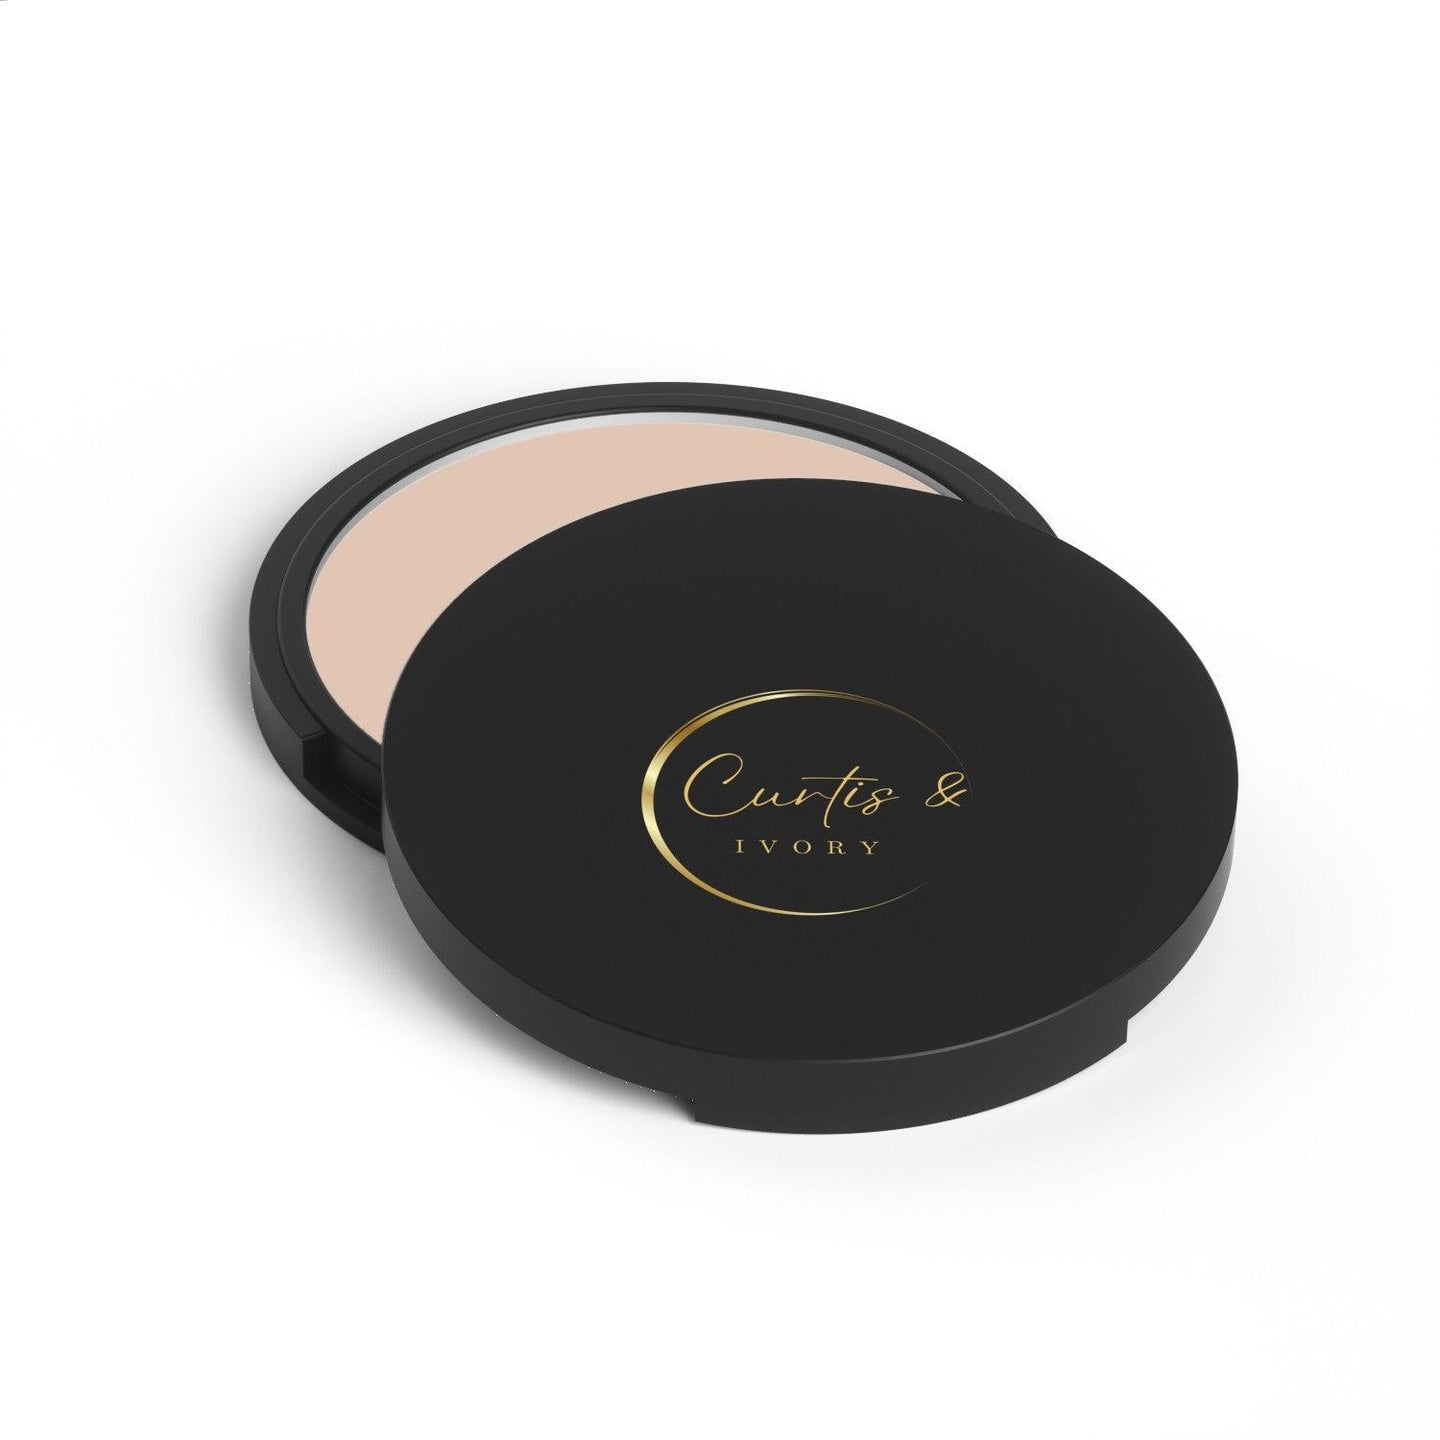 Curtis & Ivory Bronzer 20 Look natural and be compatible with blush for a dimensional look. - Curtis & Ivory